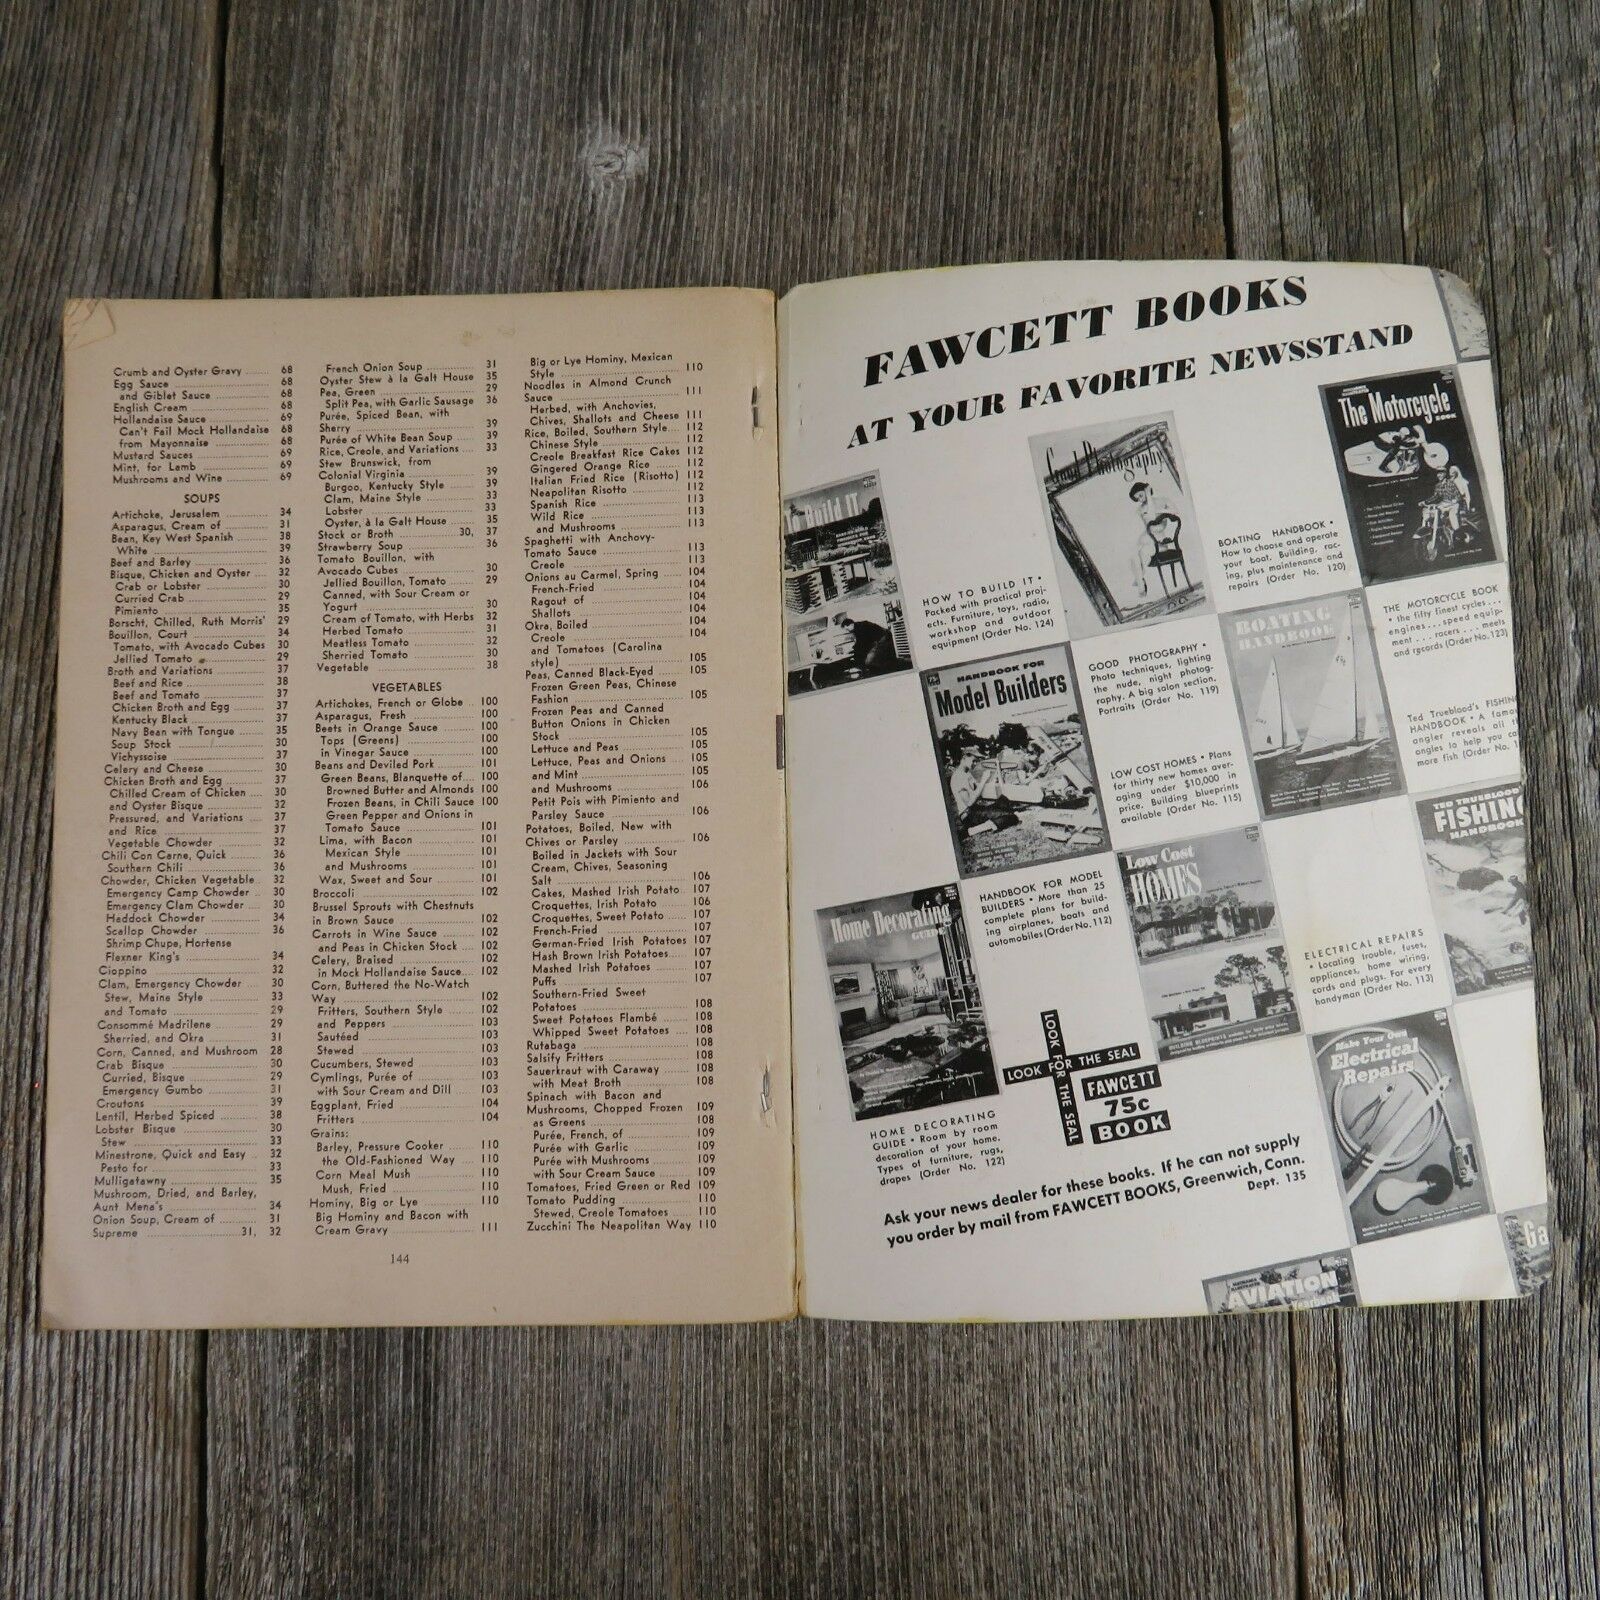 Vintage Cookbook Quick Cooking from the Top of the Stove Marion Flexner # 135 - At Grandma's Table